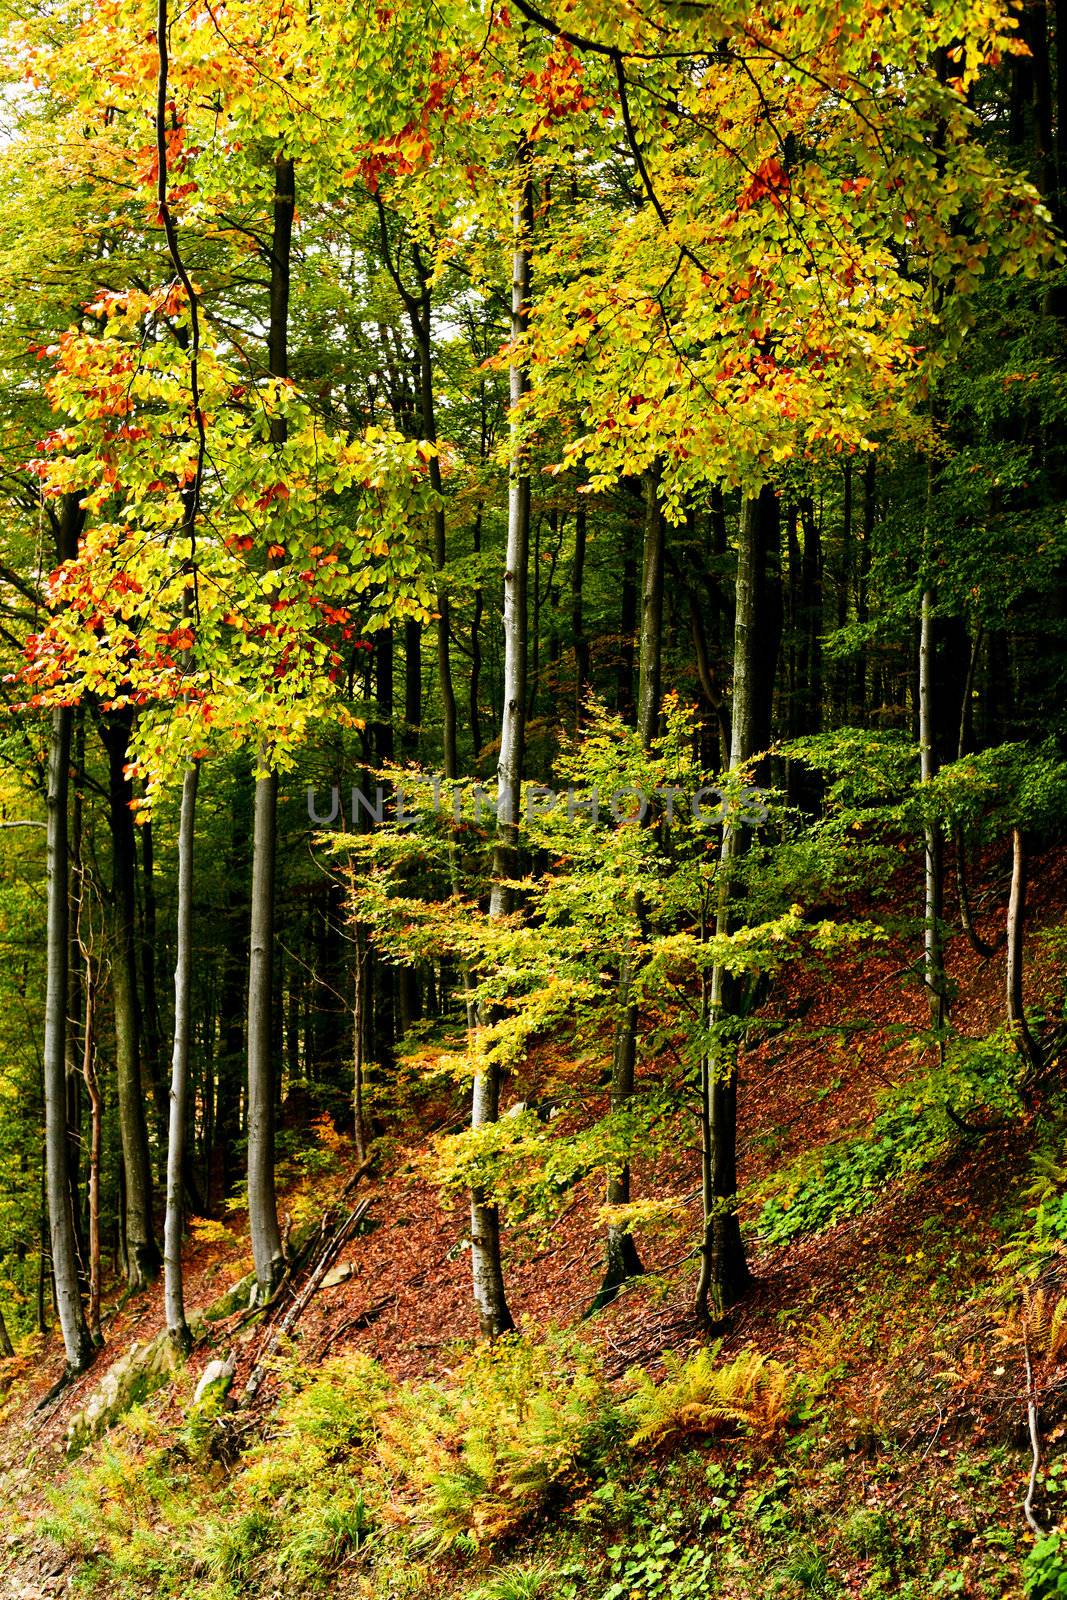 An image of a autumn trees in a forest